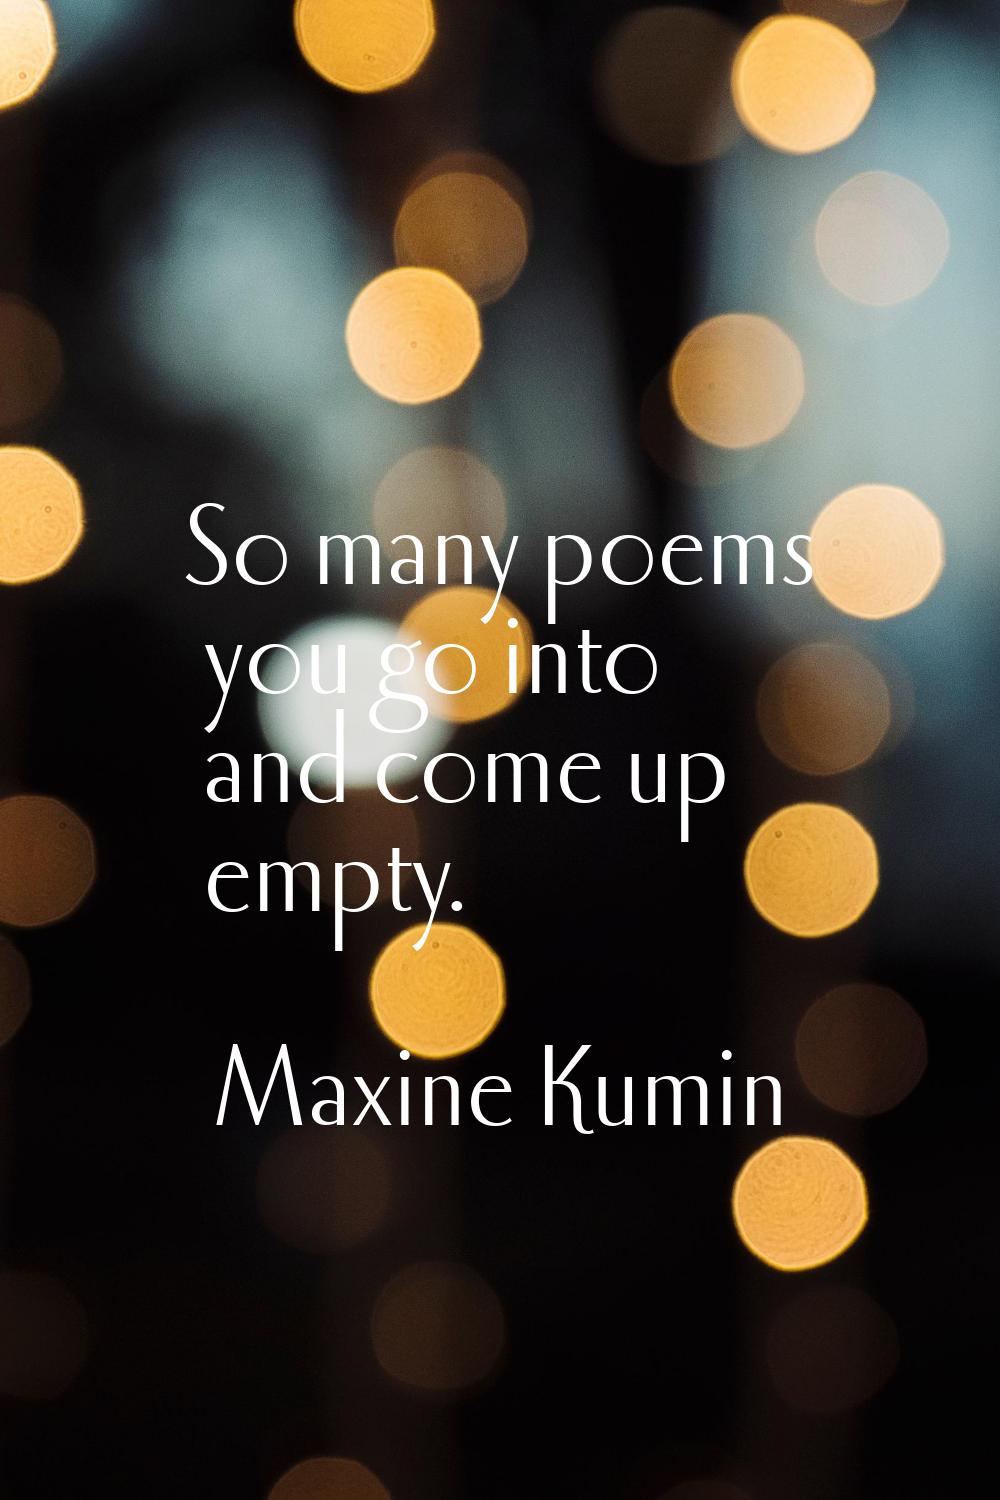 So many poems you go into and come up empty.